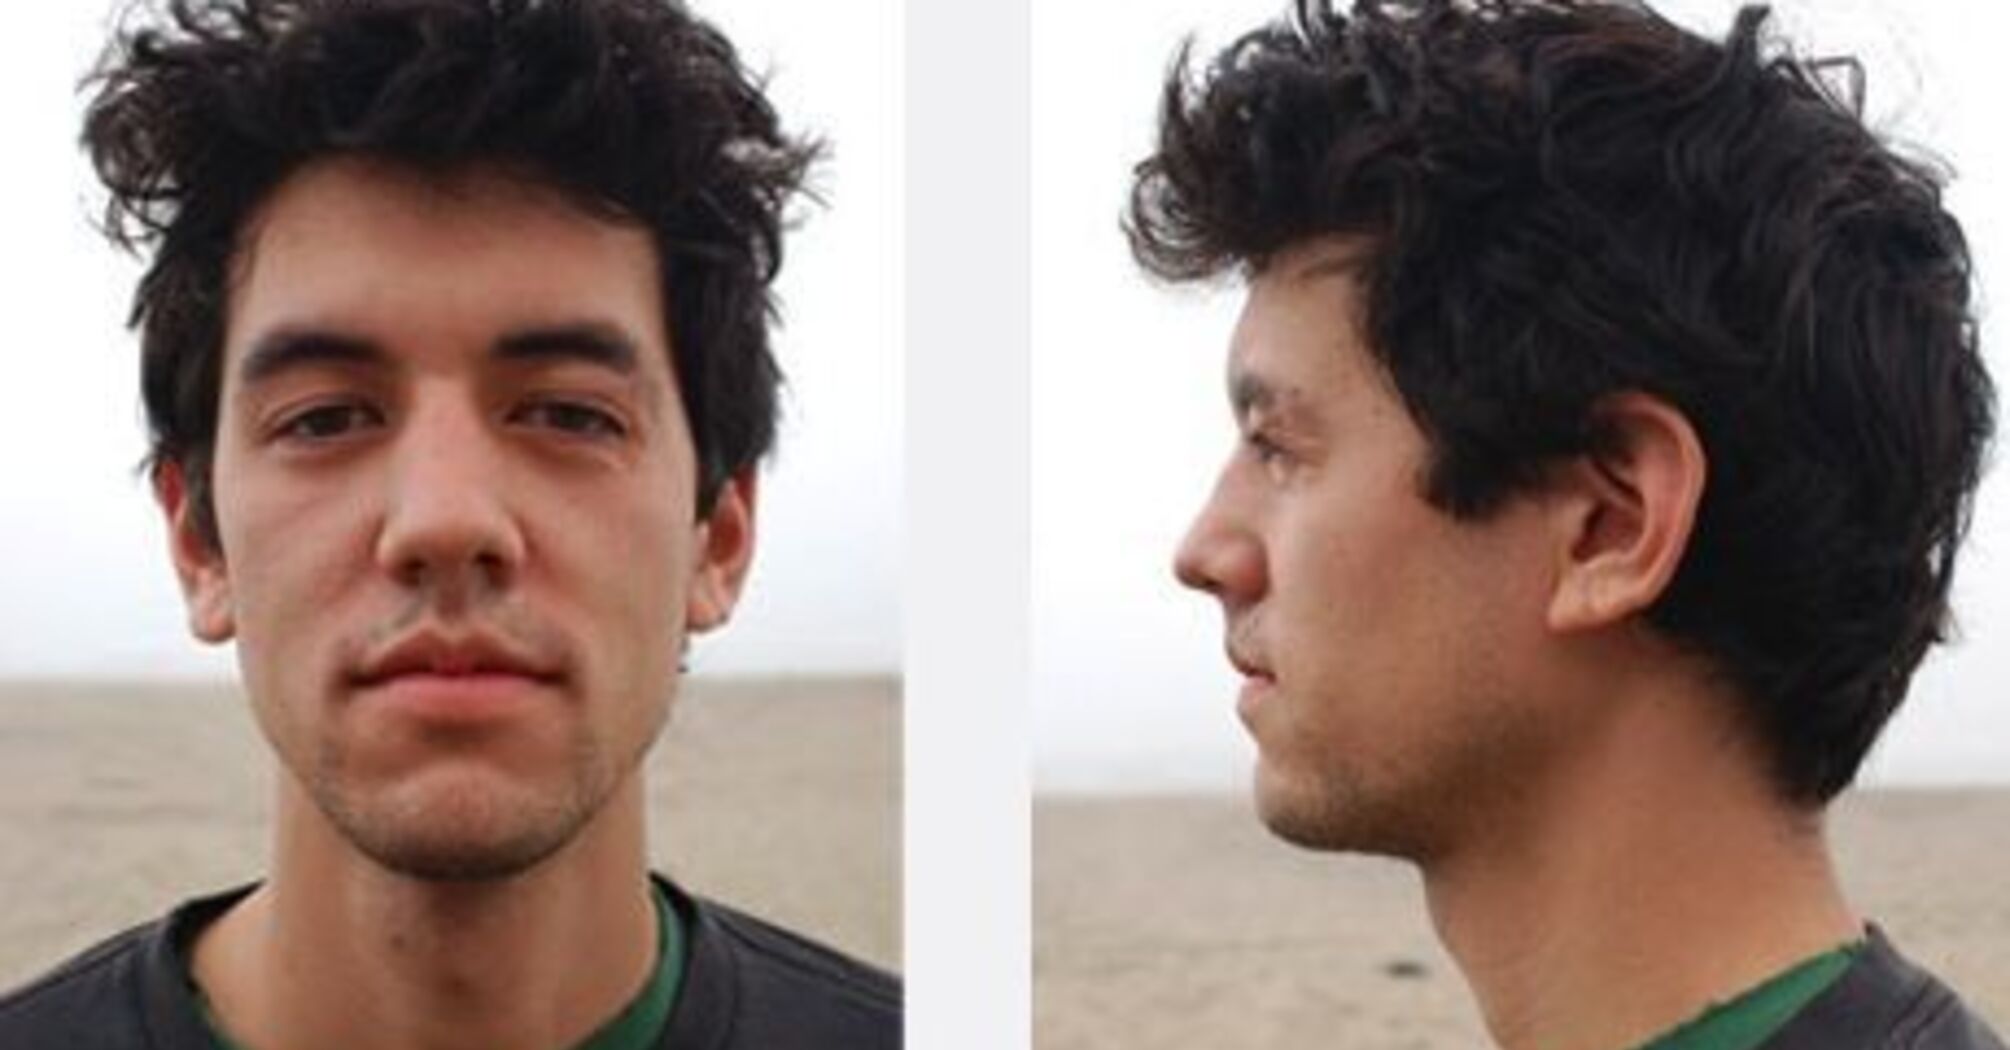 How you see a person's face from the front or in profile